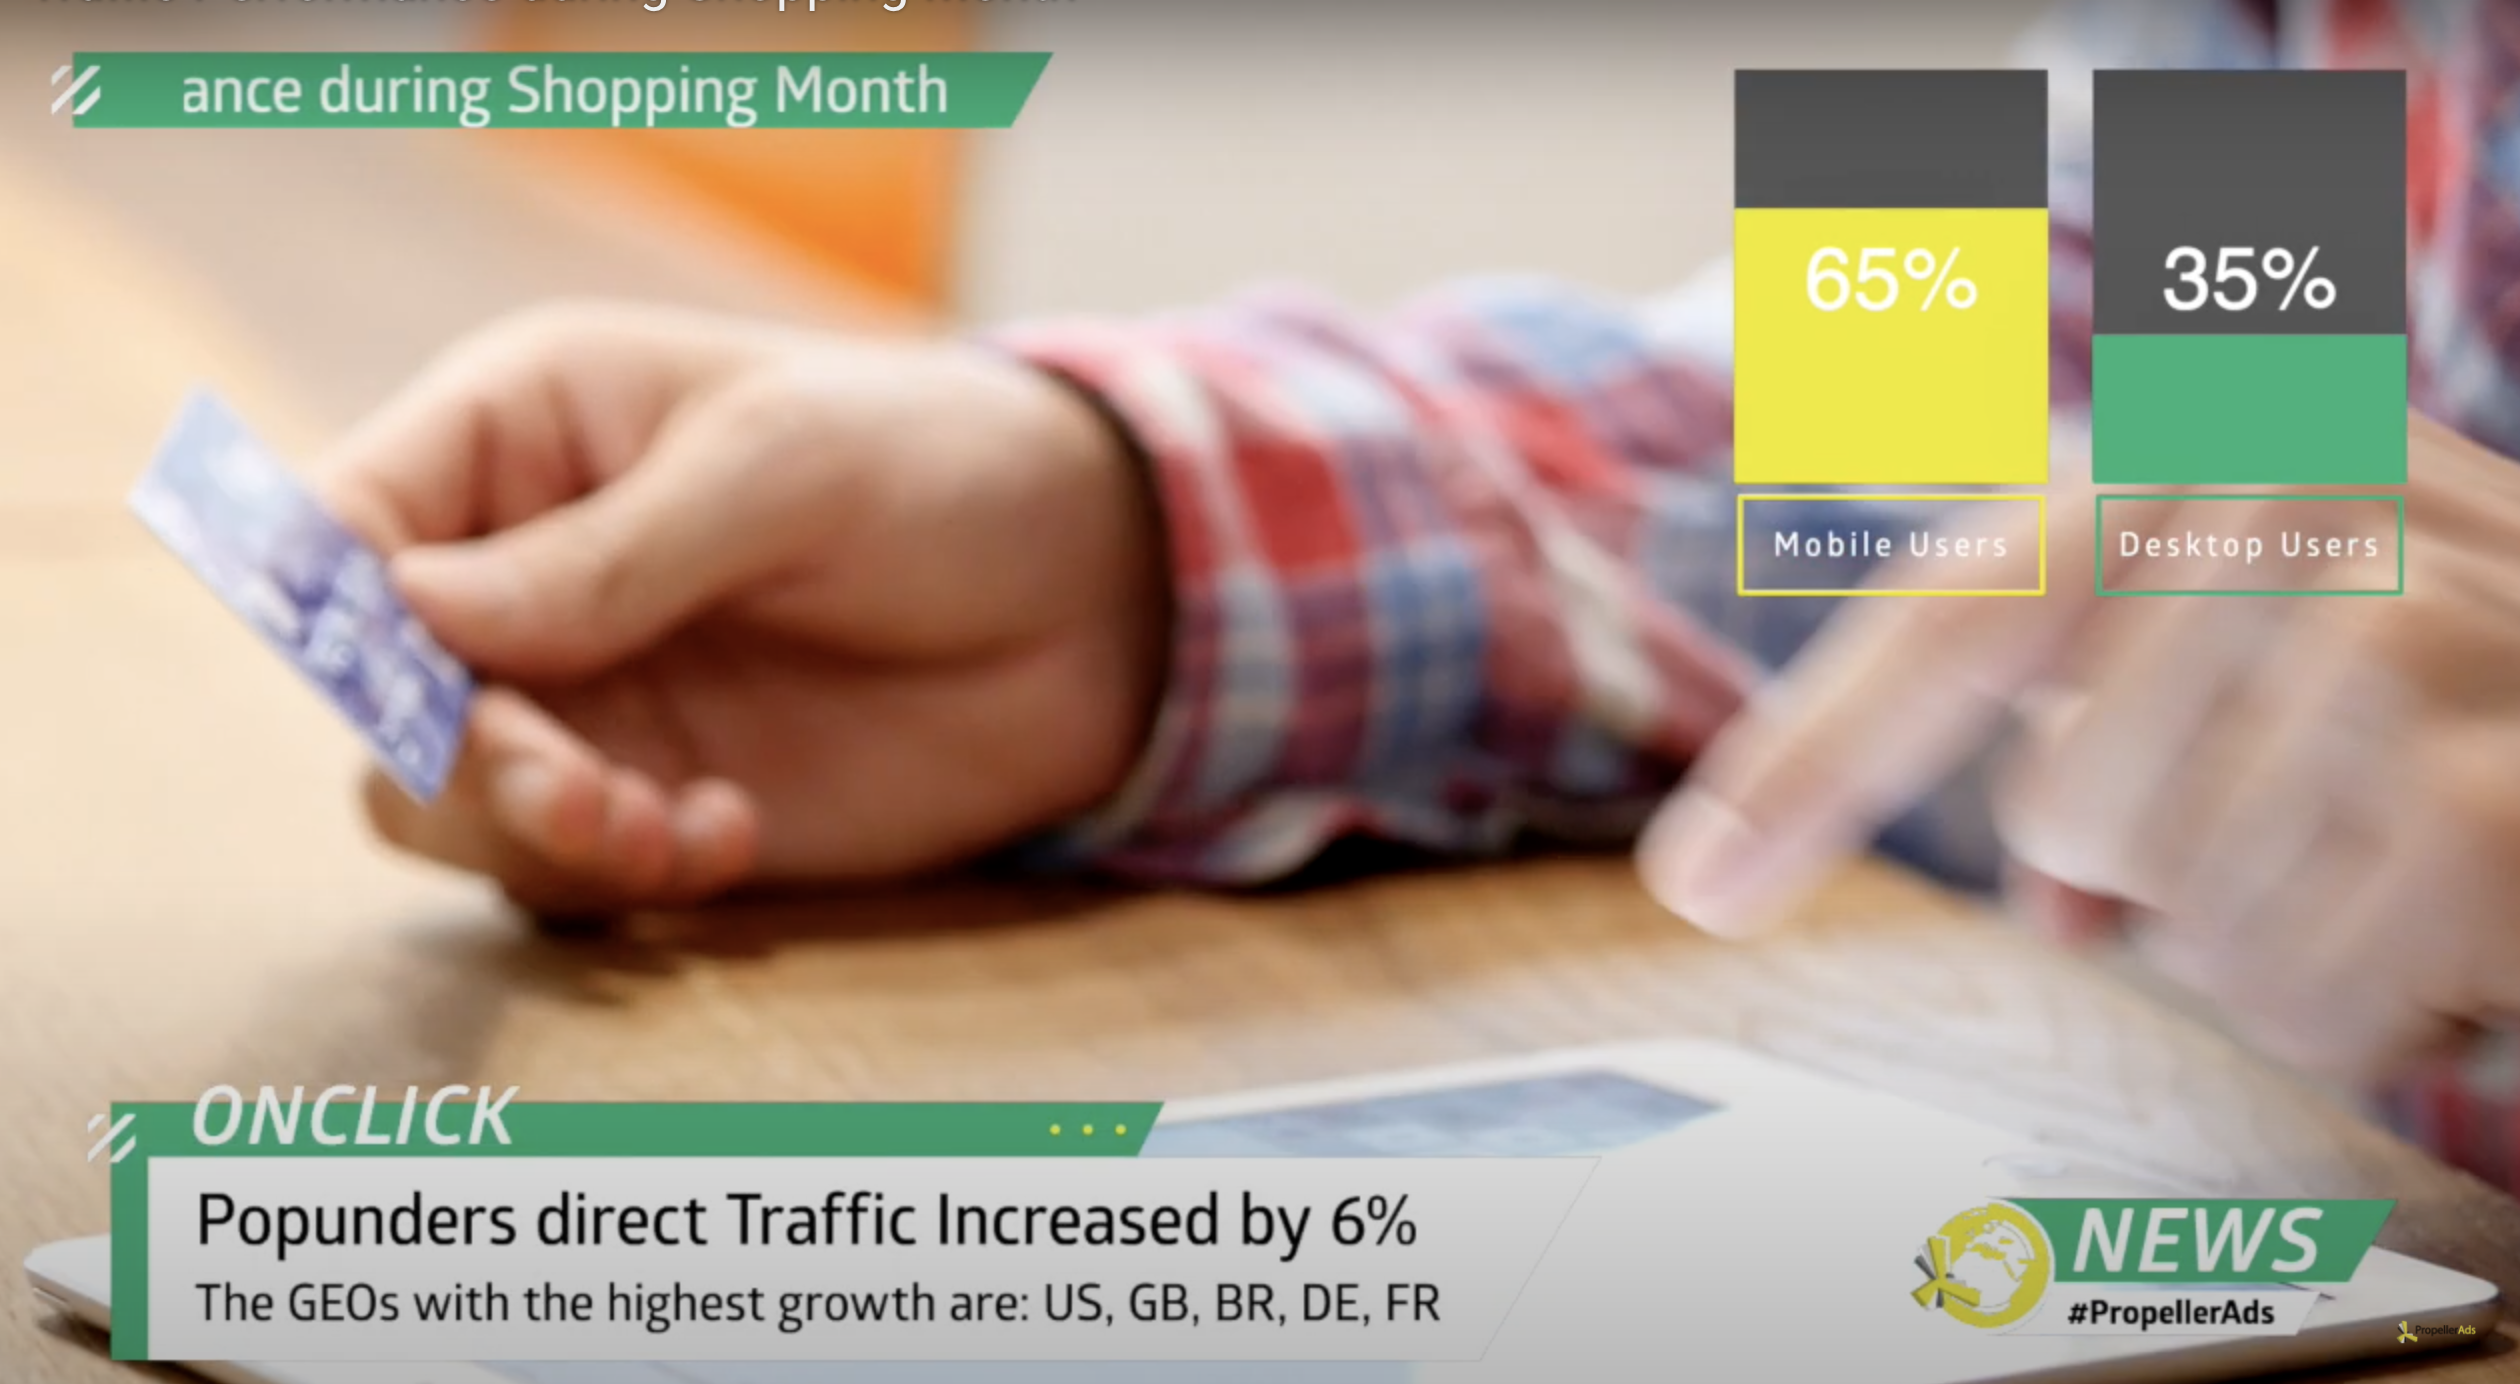 Traffic+Performance+during+Shopping+Month+-+YouTube+2020-12-24+12-11-44